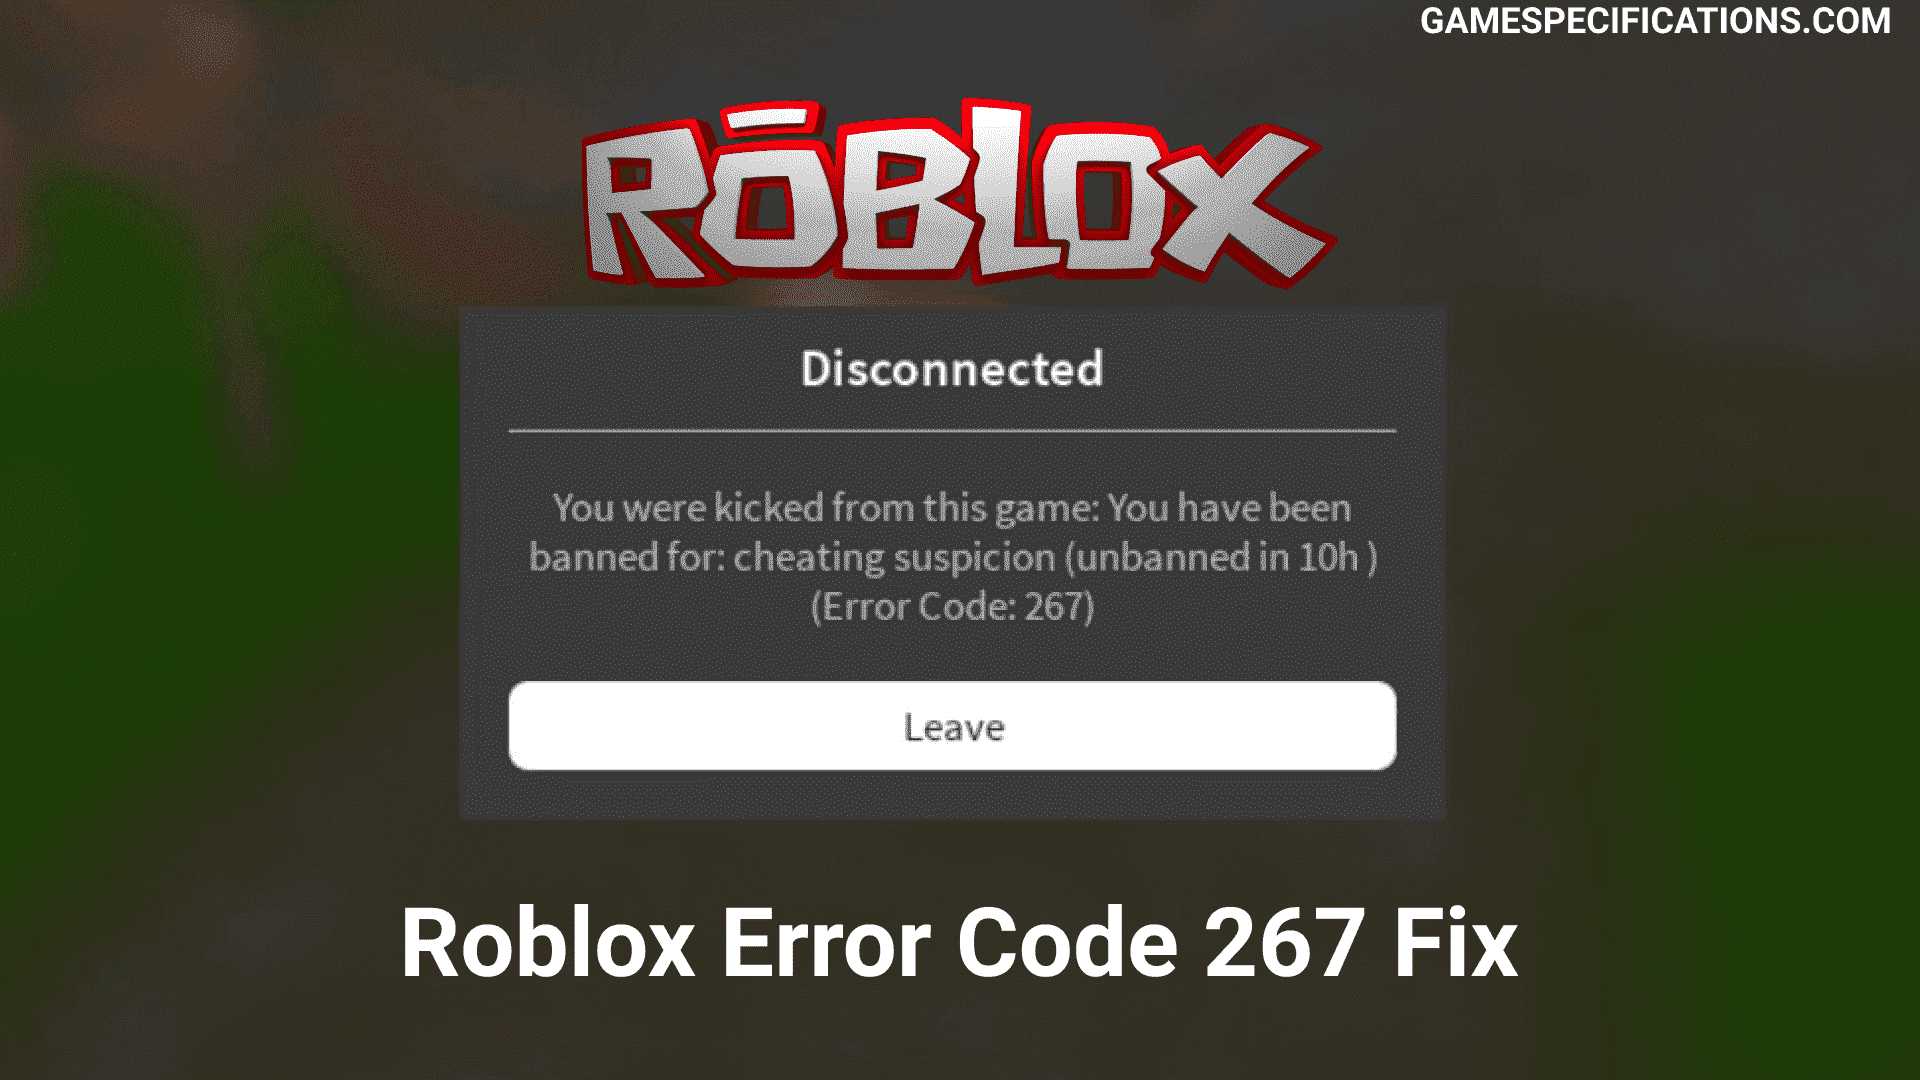 10 Proven Fixes For Roblox Error Code 267 2021 Game Specifications - how to get unbanned from a roblox game